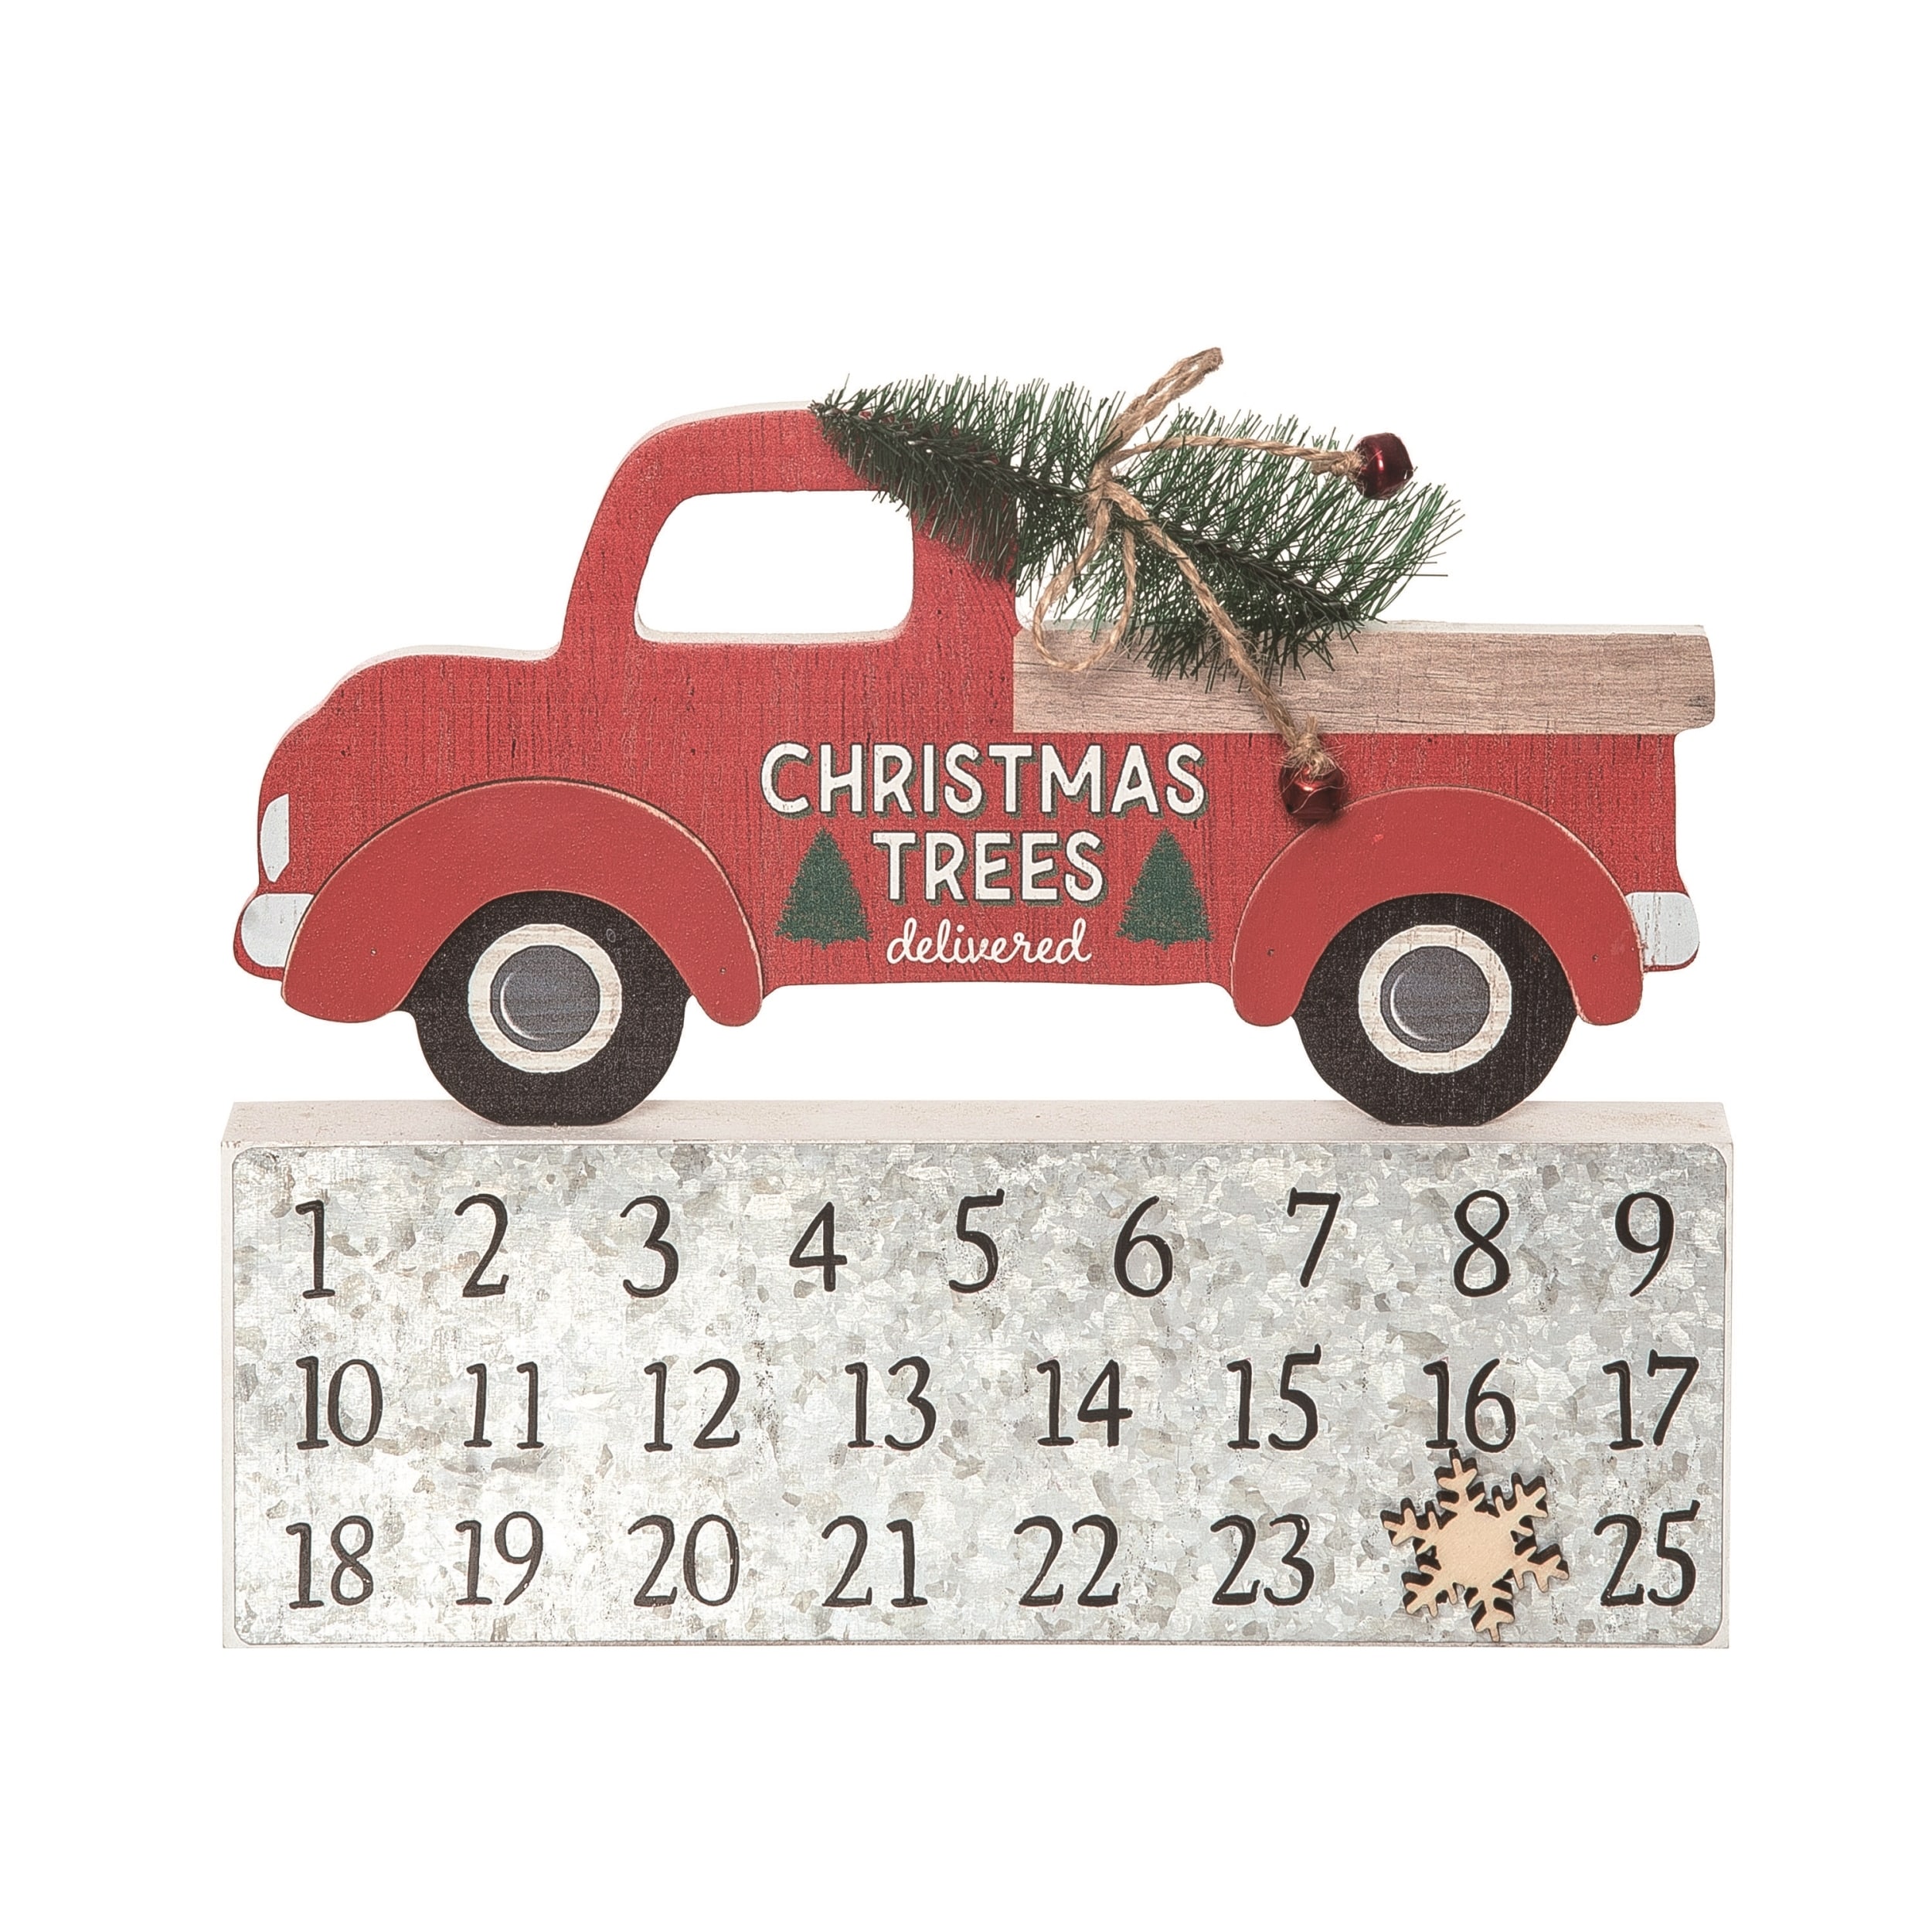 Transpac Wood 9.06 in. Multicolor Christmas Truck with Calendar Decor Set of 2 - Silver/Red